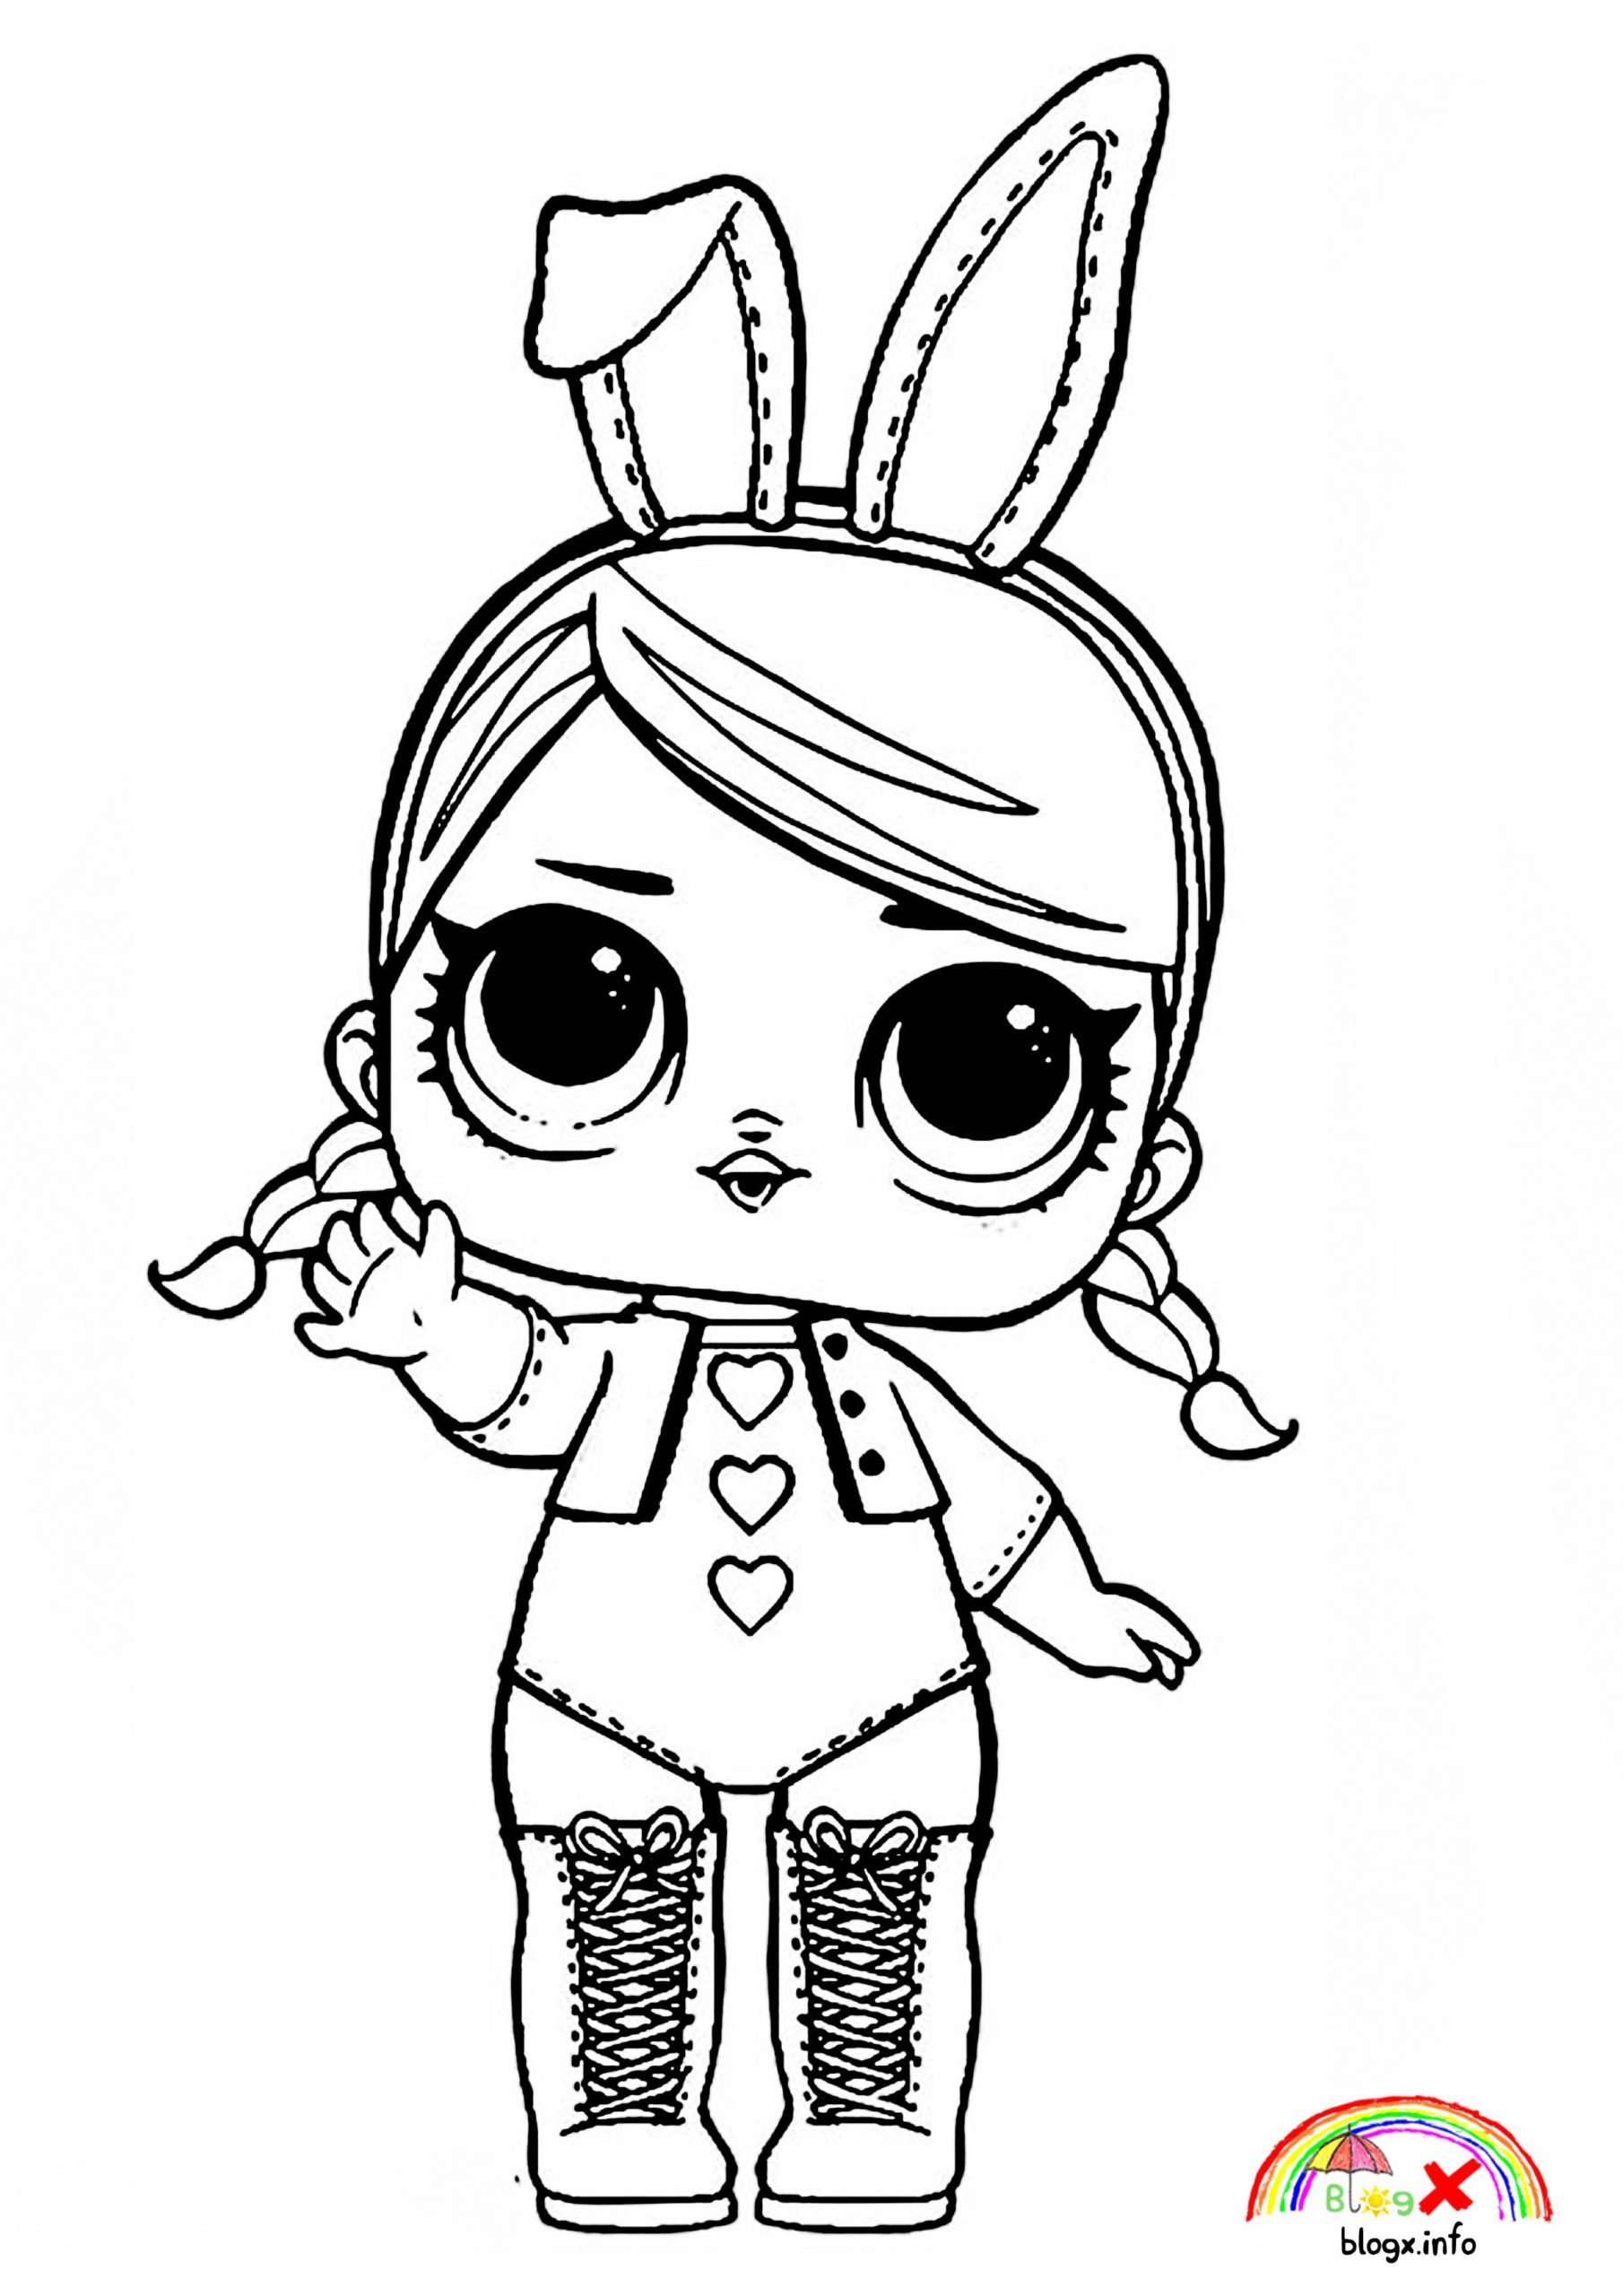 Coloring Pages  Bunny Costume Lol Surprise Dolls Coloring ...